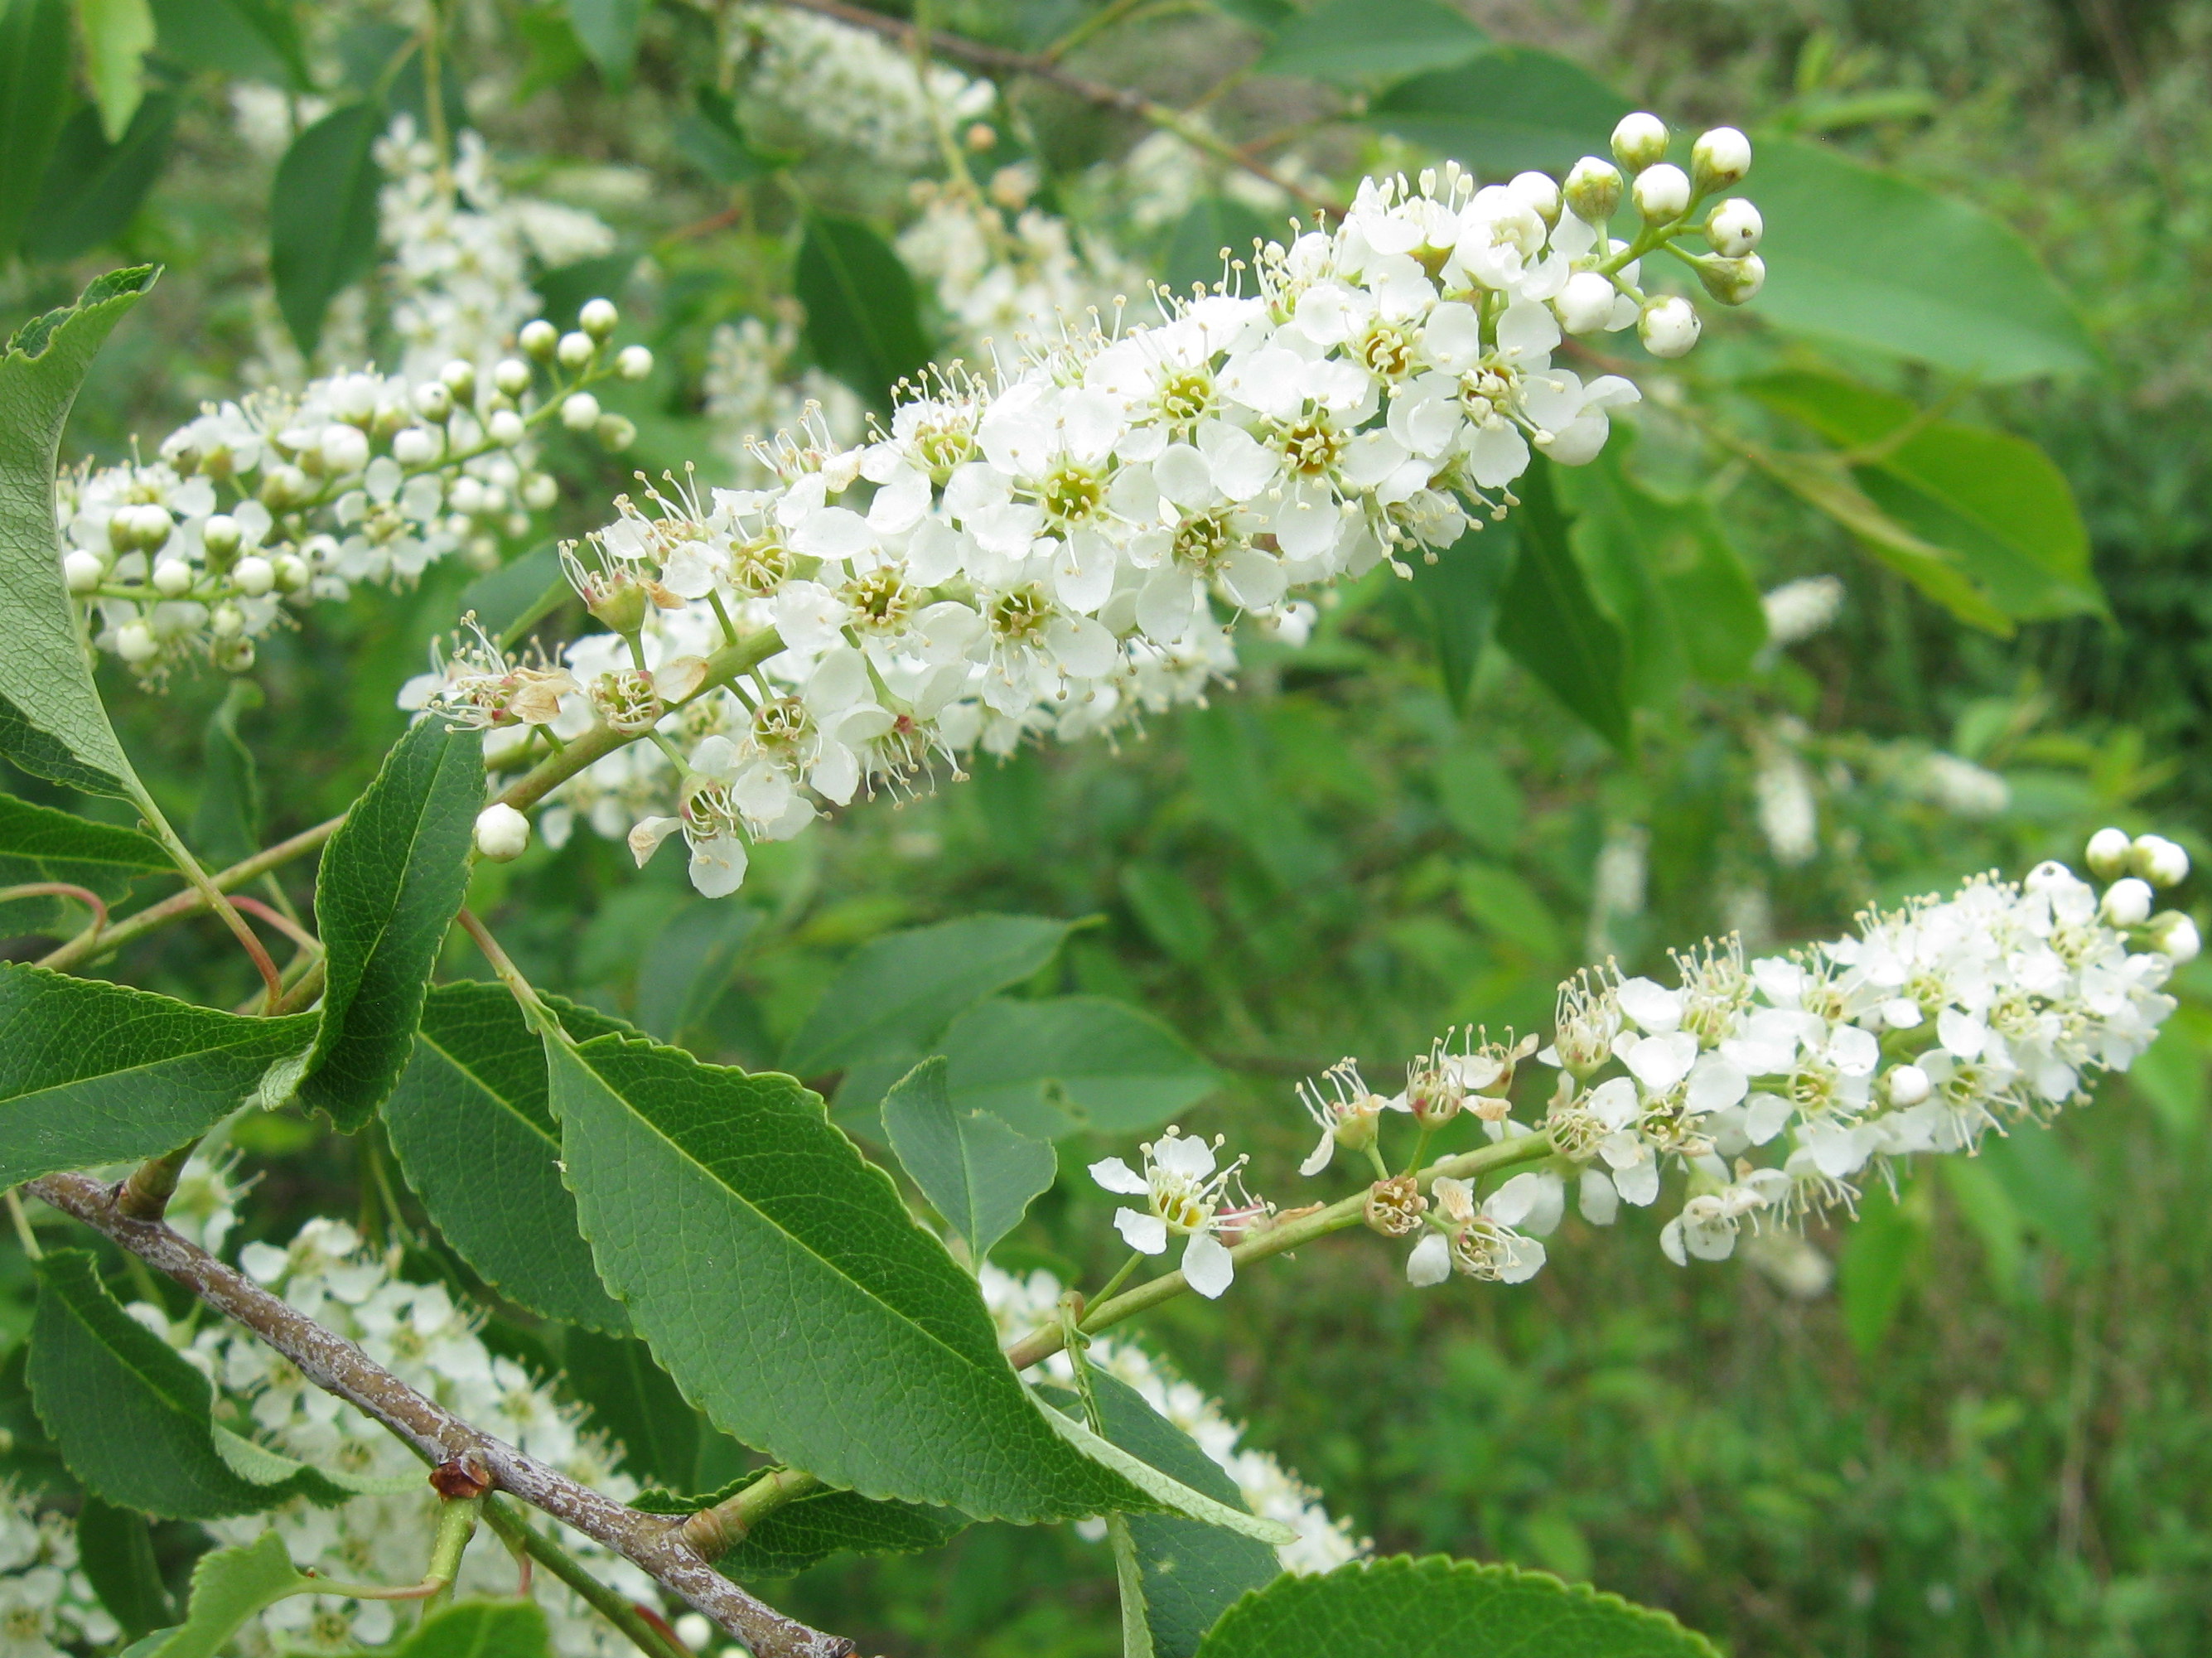 Tree With Small White Flower Clusters Images - Flower Decoration Ideas